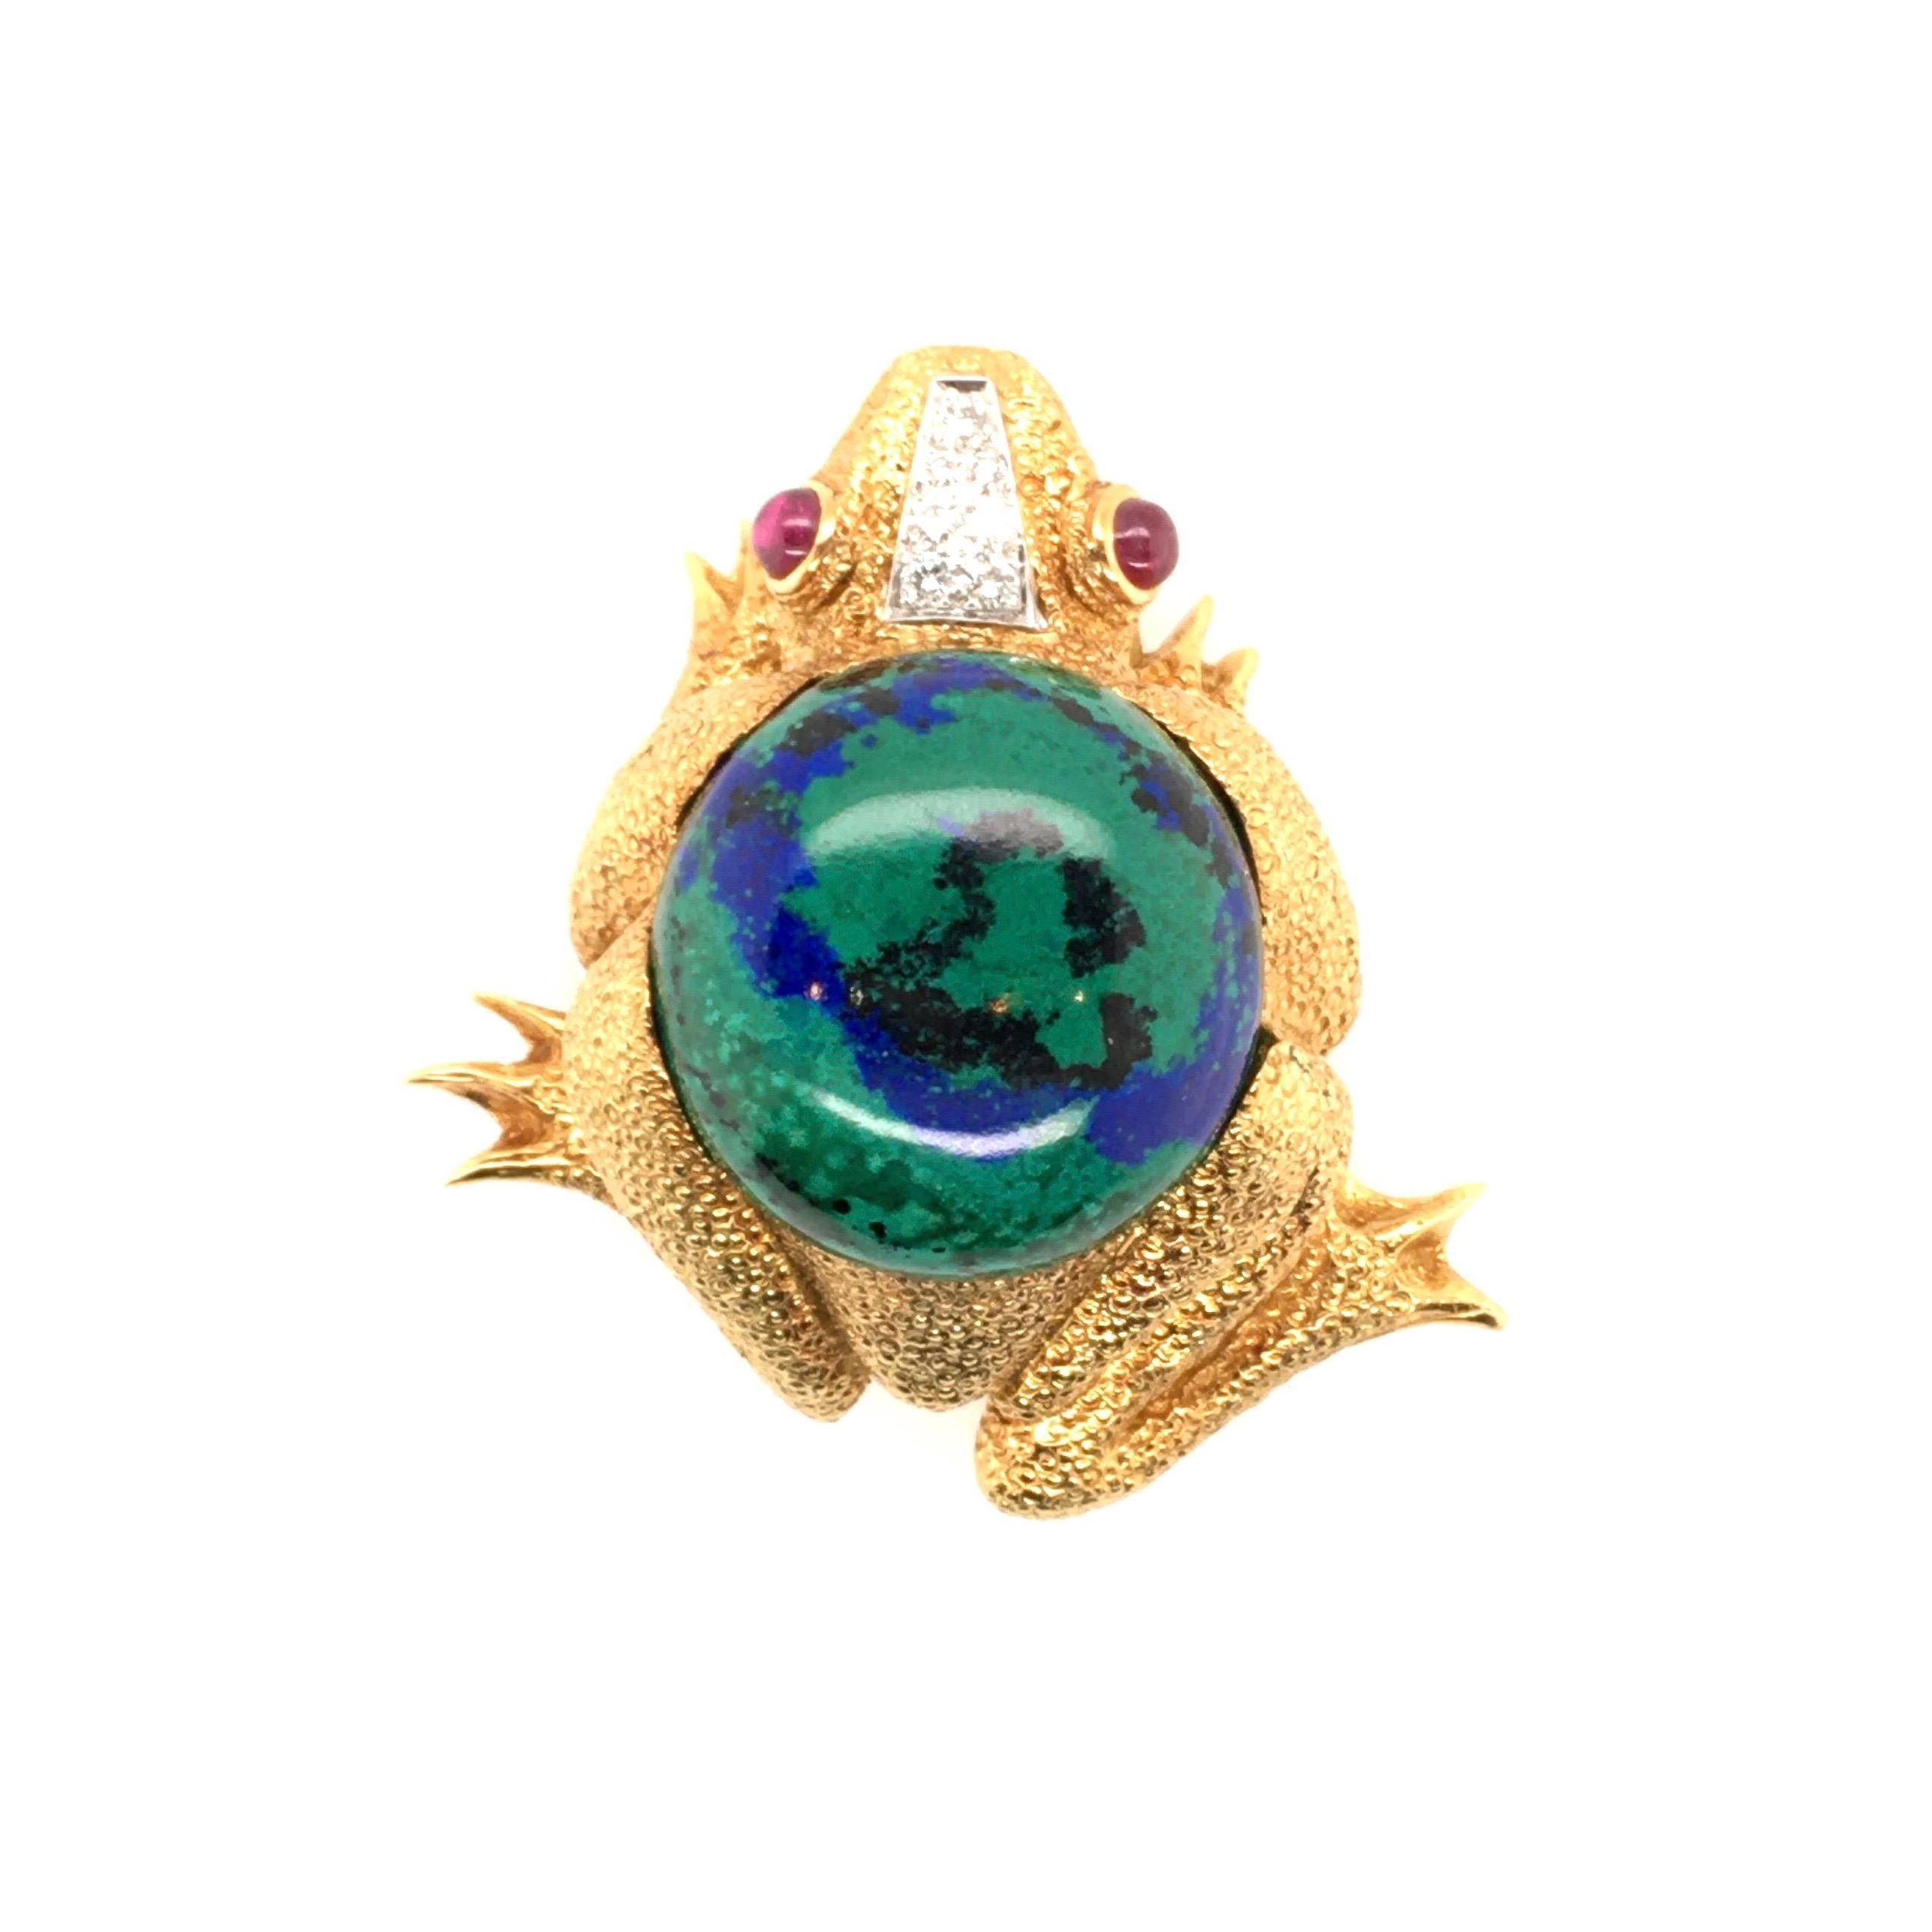 An 18 karat yellow gold, azurmalachite, ruby and diamond frog brooch. David Webb. Designed as a textured gold seated frog, set to the top with a cabochon azurmalachite, measuring approximately 26mm, enhanced by cabochon ruby eyes and a pave set